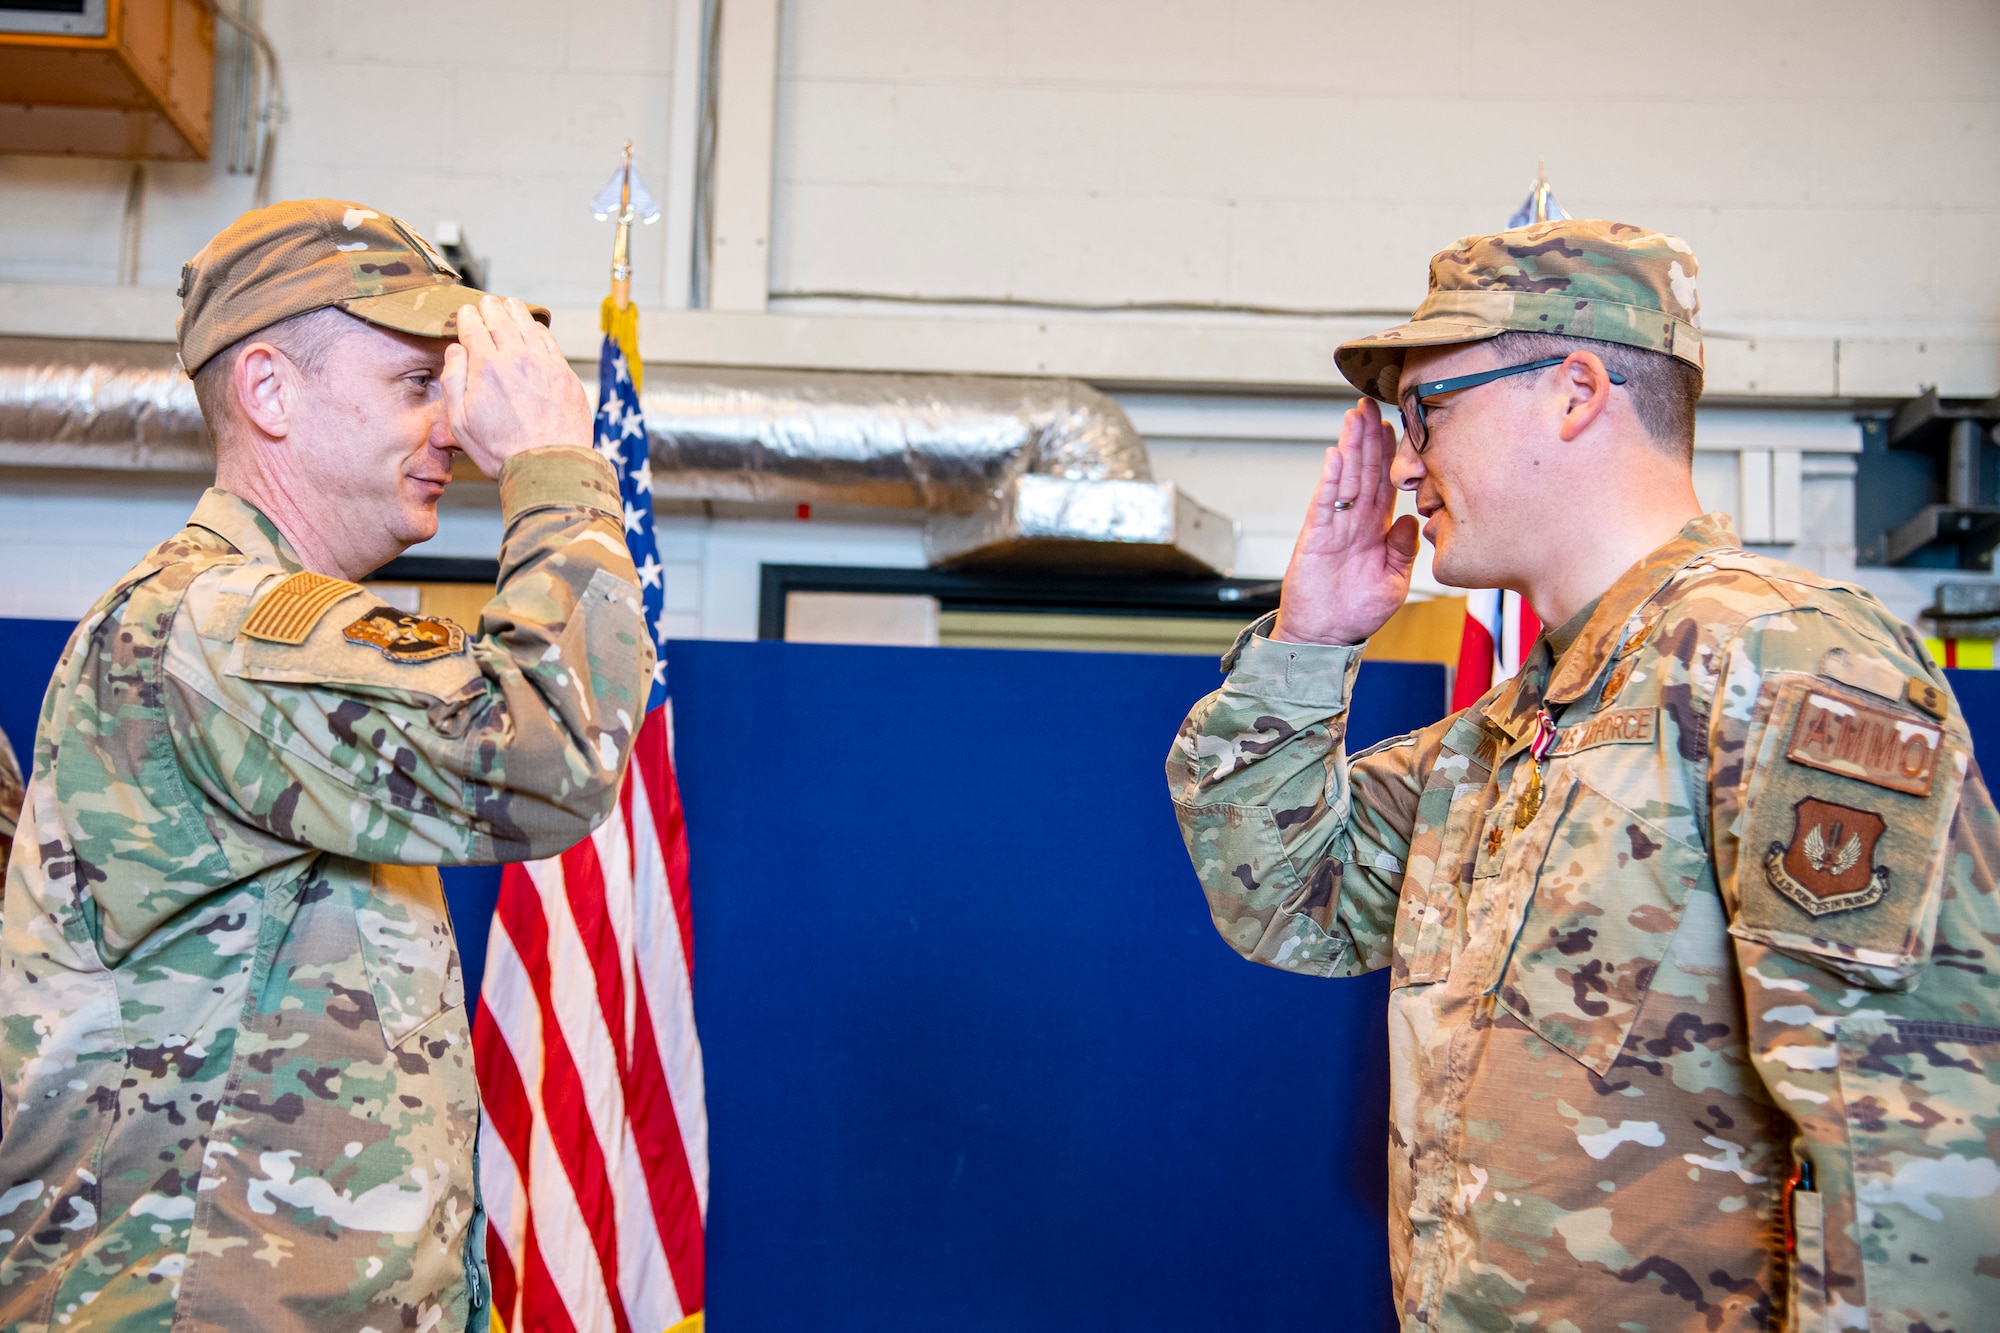 U.S. Air Force Maj. Christopher Wood, right, 420th Munitions Squadron outgoing commander, salutes Col. Jon T. Hannah, 422d Air Base Group commander, during a change of command ceremony at RAF Welford, England, May 26, 2022. During his command Wood was responsible for all munitions operations maintaining USAFE’s second largest weapons stockpile valued at $403 million in war reserve material. (U.S. Air Force photo by Staff Sgt. Eugene Oliver)